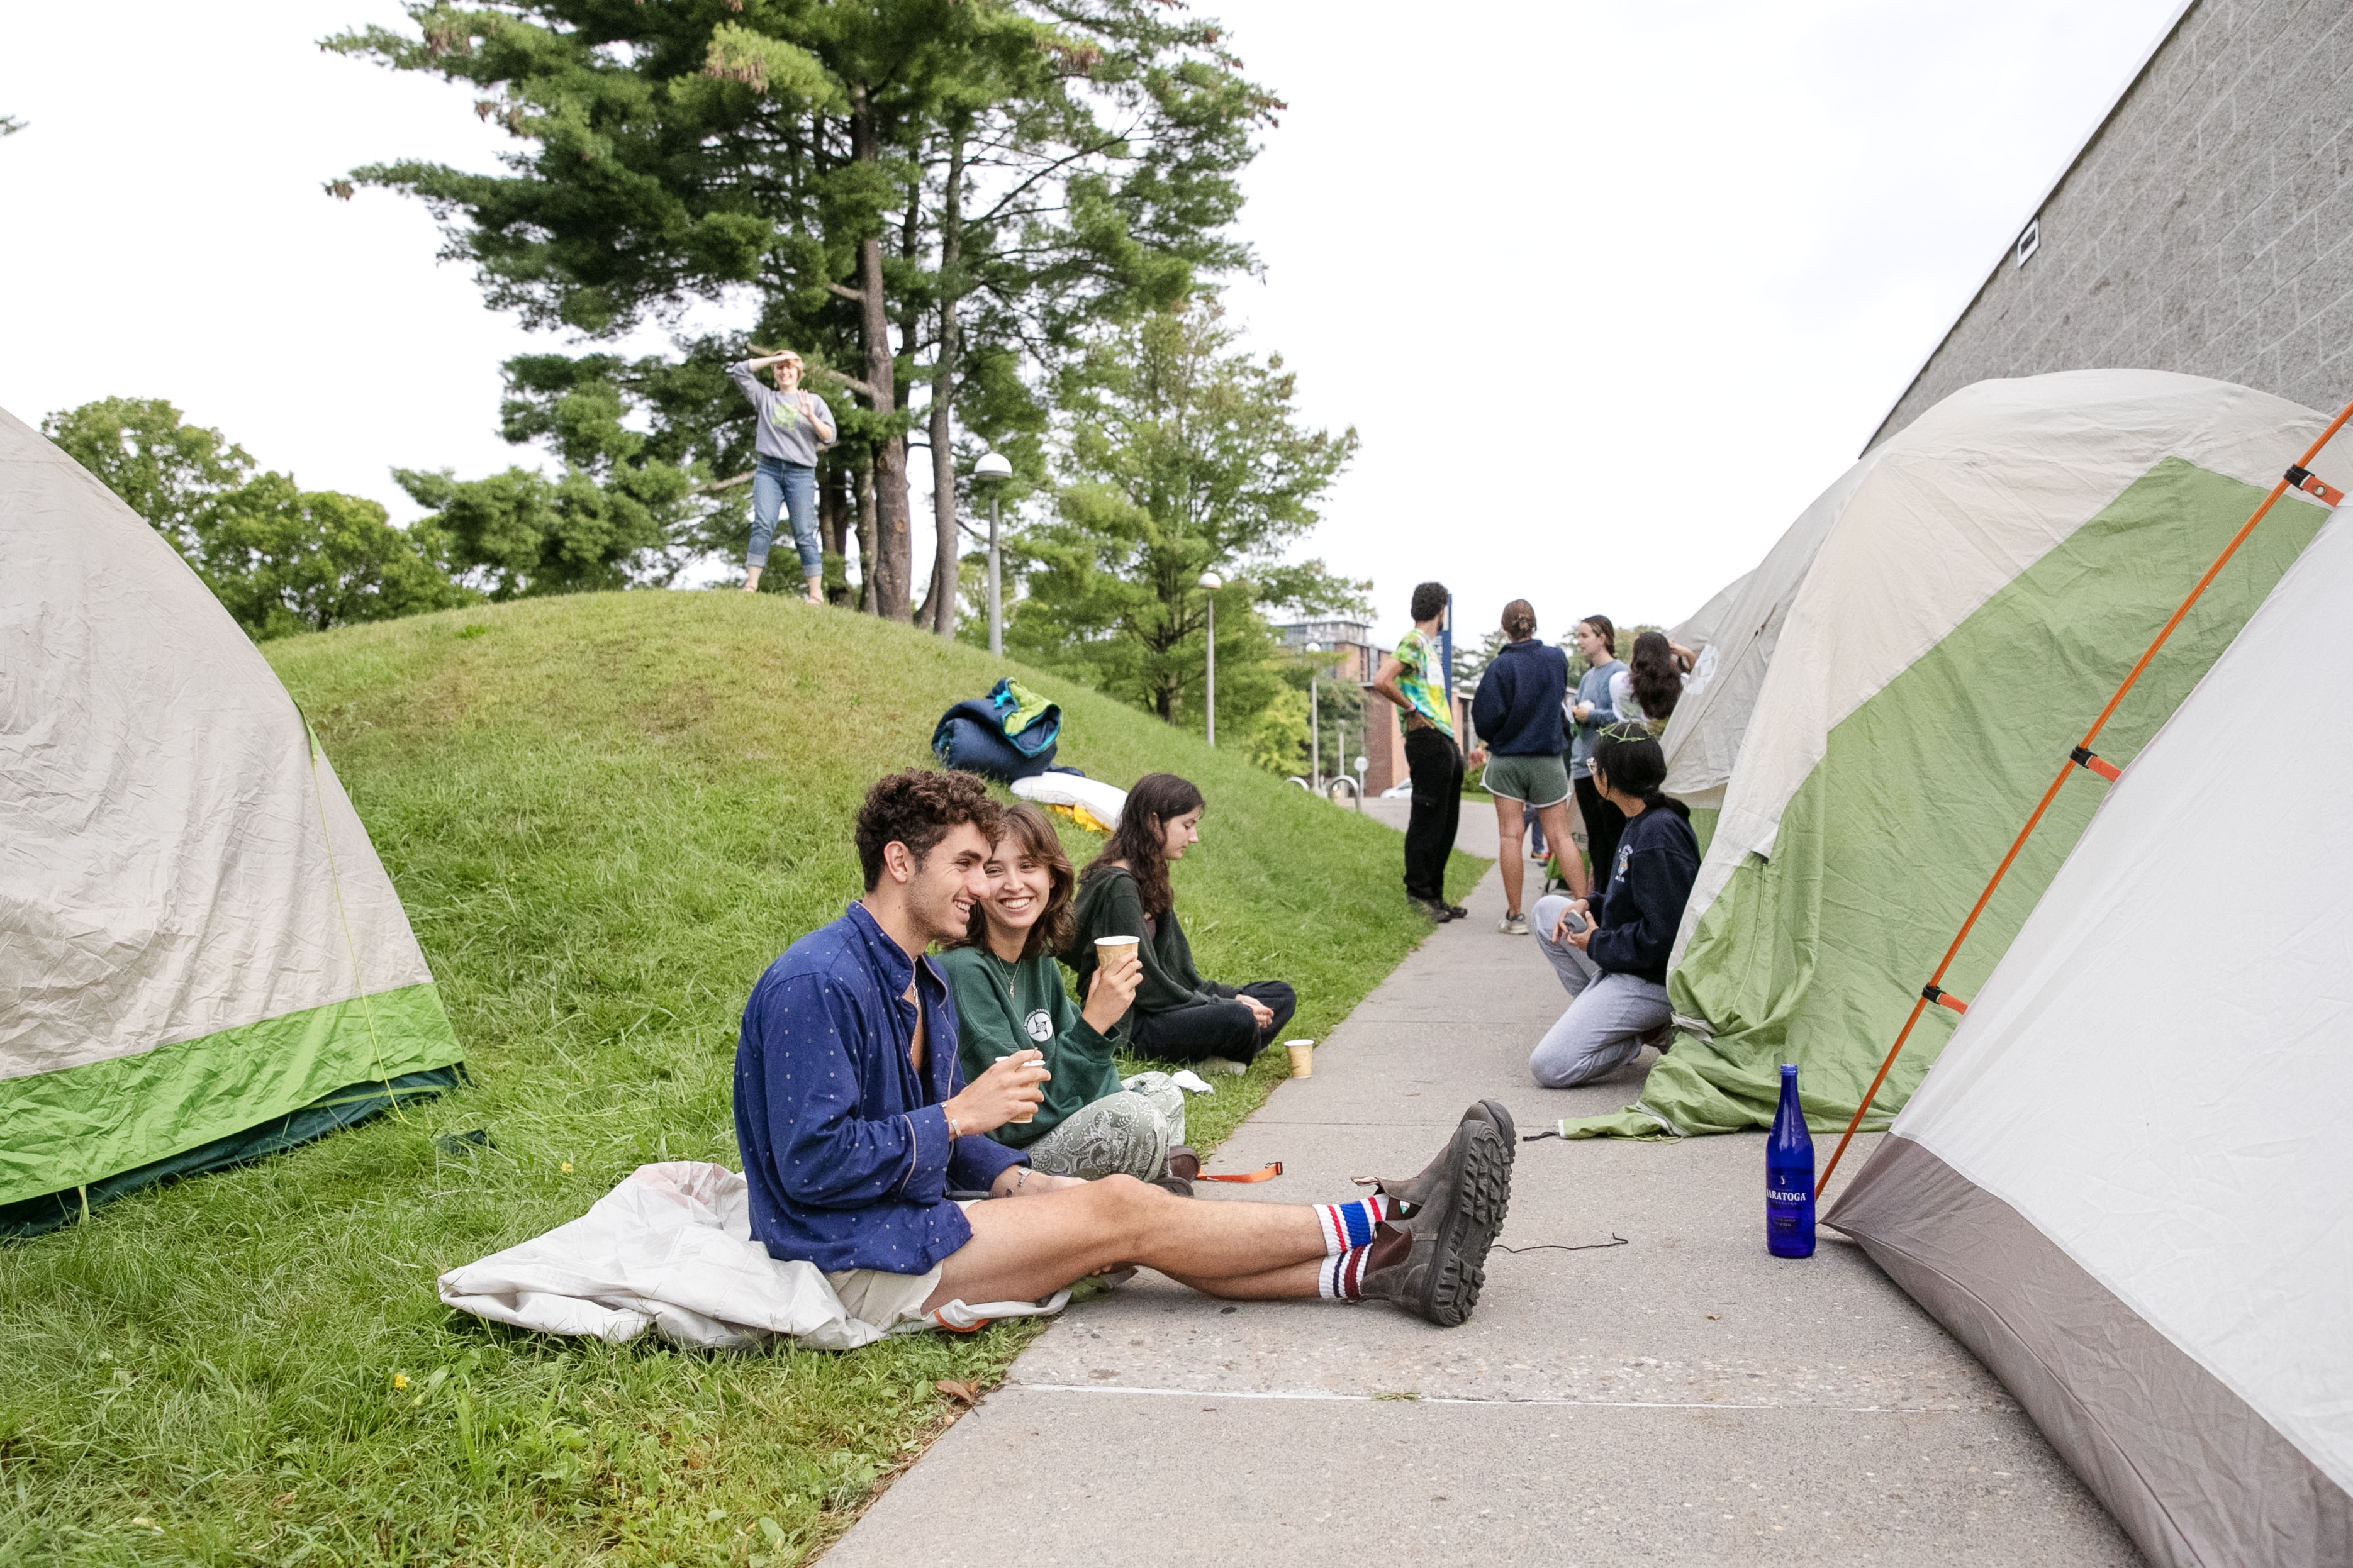 A few students enjoy a morning coffee on the lawn outside the Tang, tents can be seen.